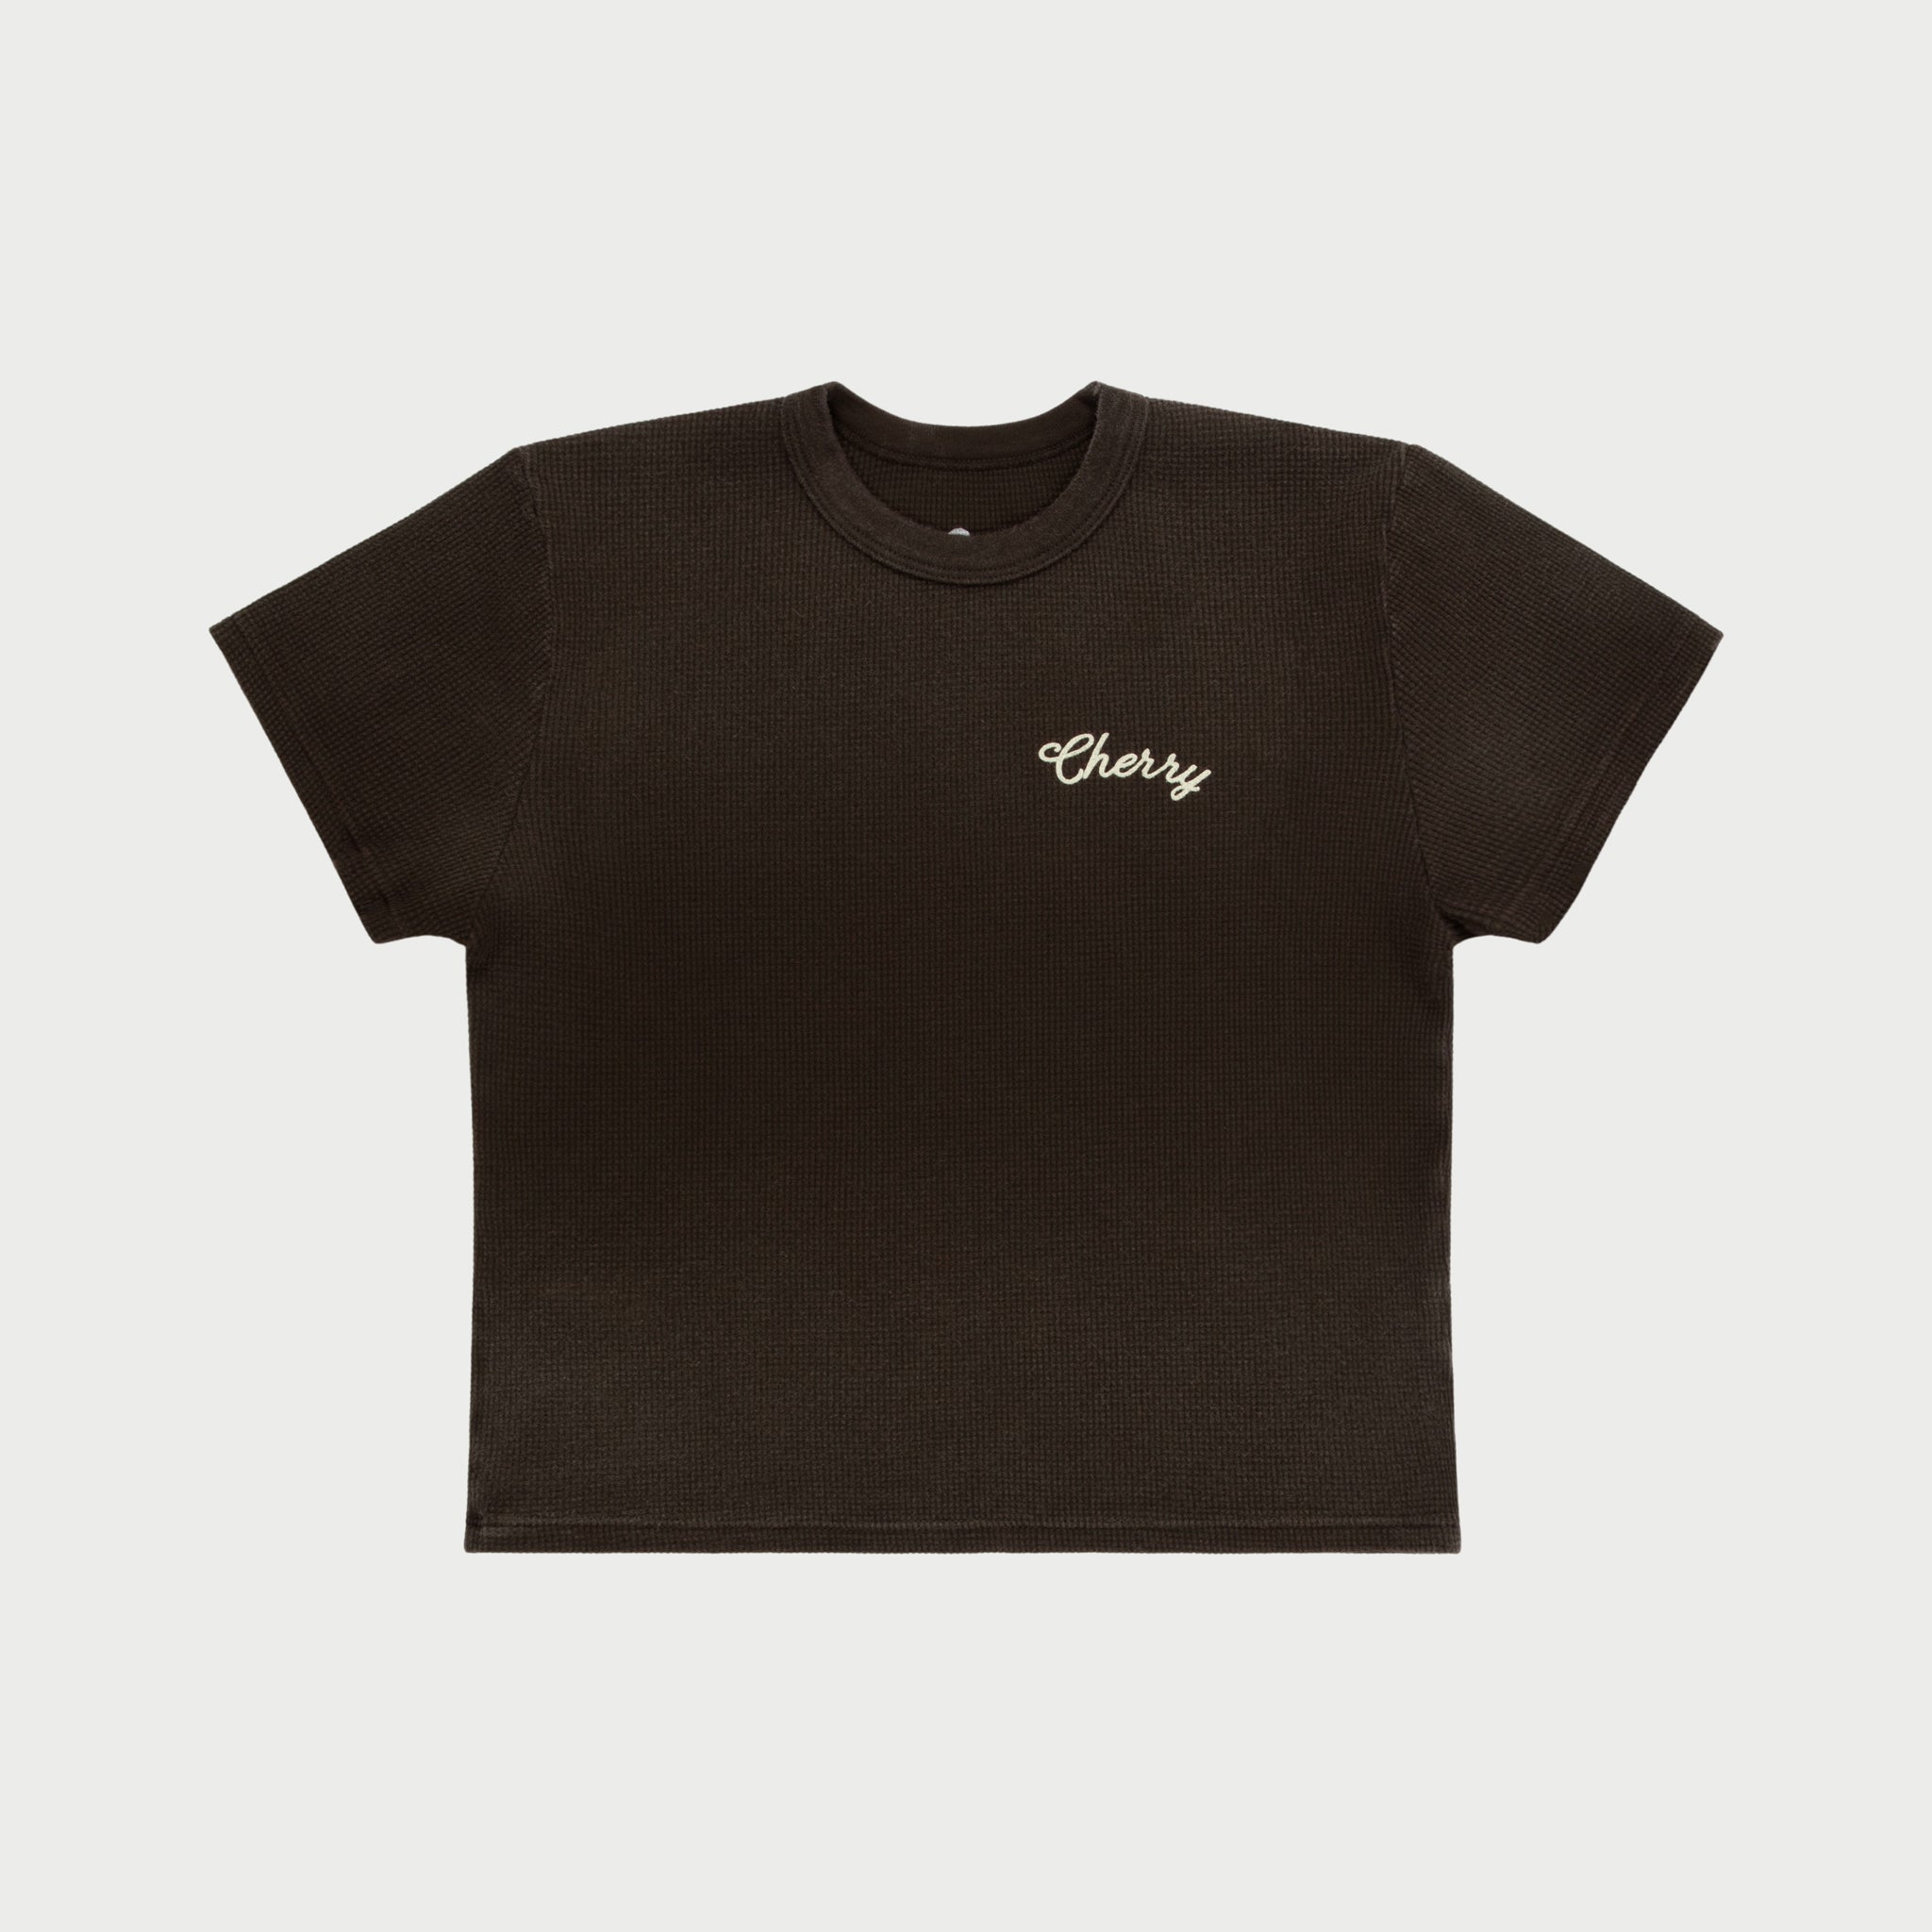 Built to Love Thermal Baby Tee (Espresso)